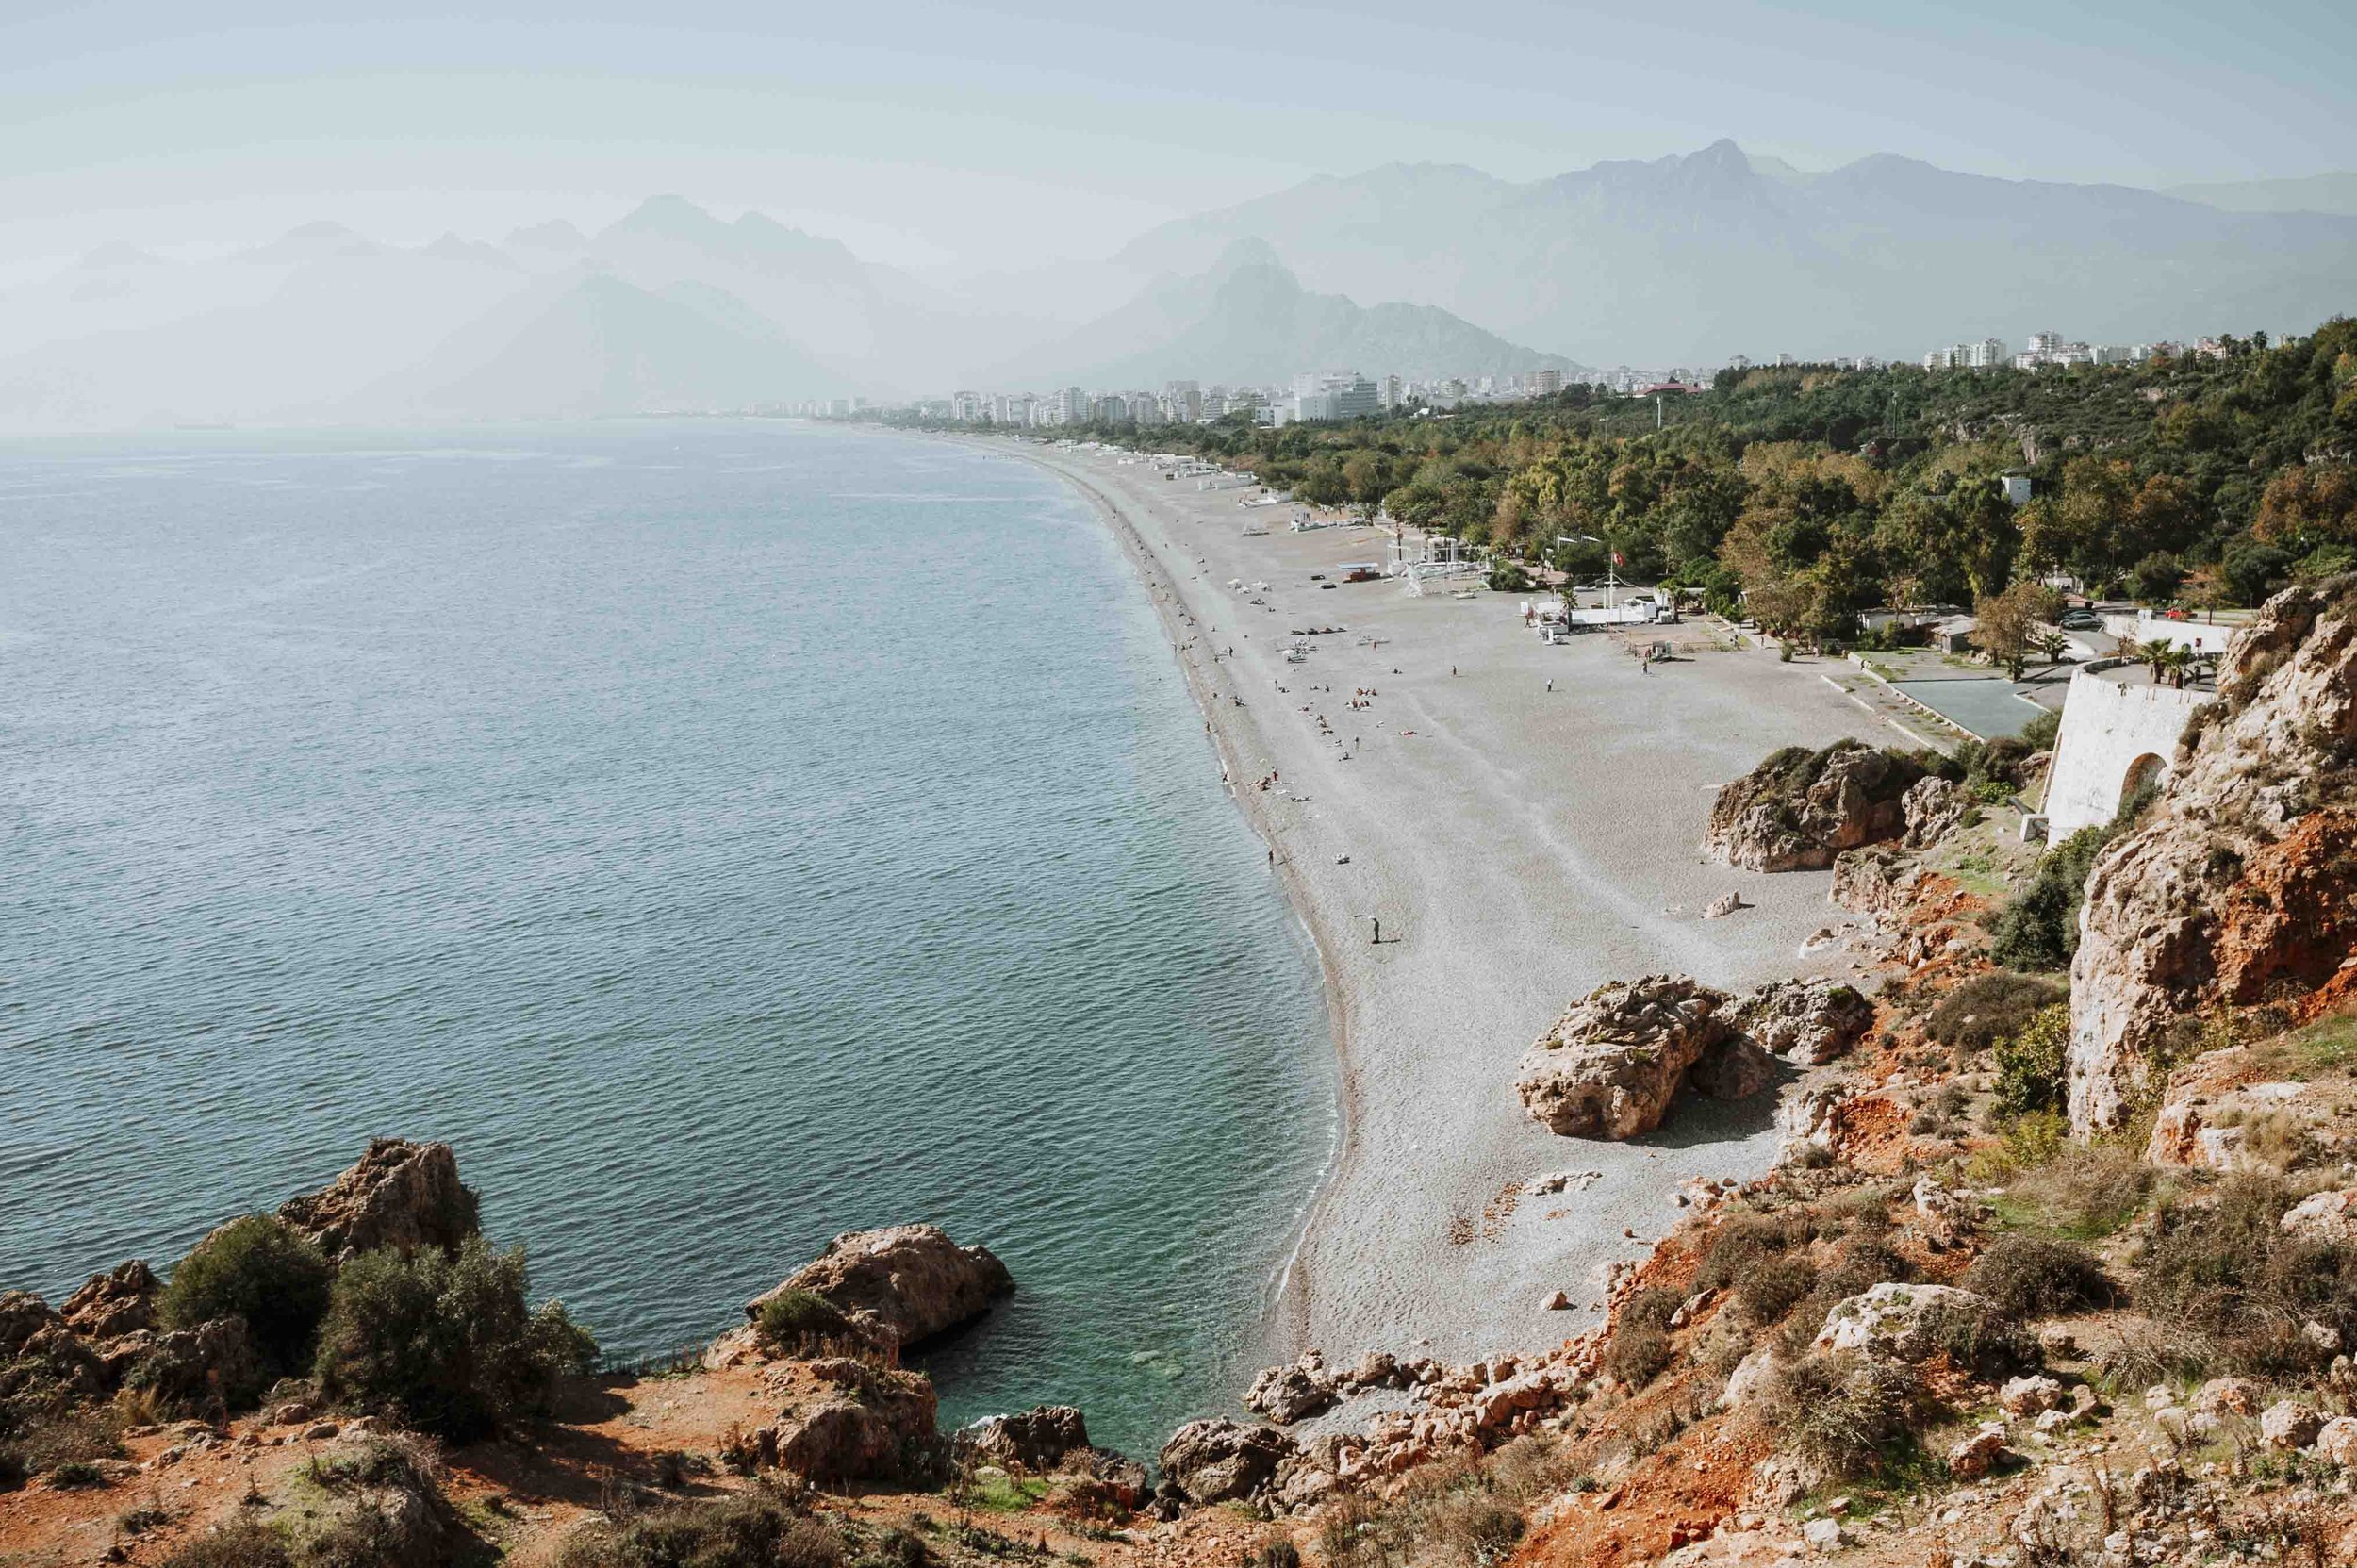 warmest place in europe in february coastline of antalya with a beautiful beach and rocks